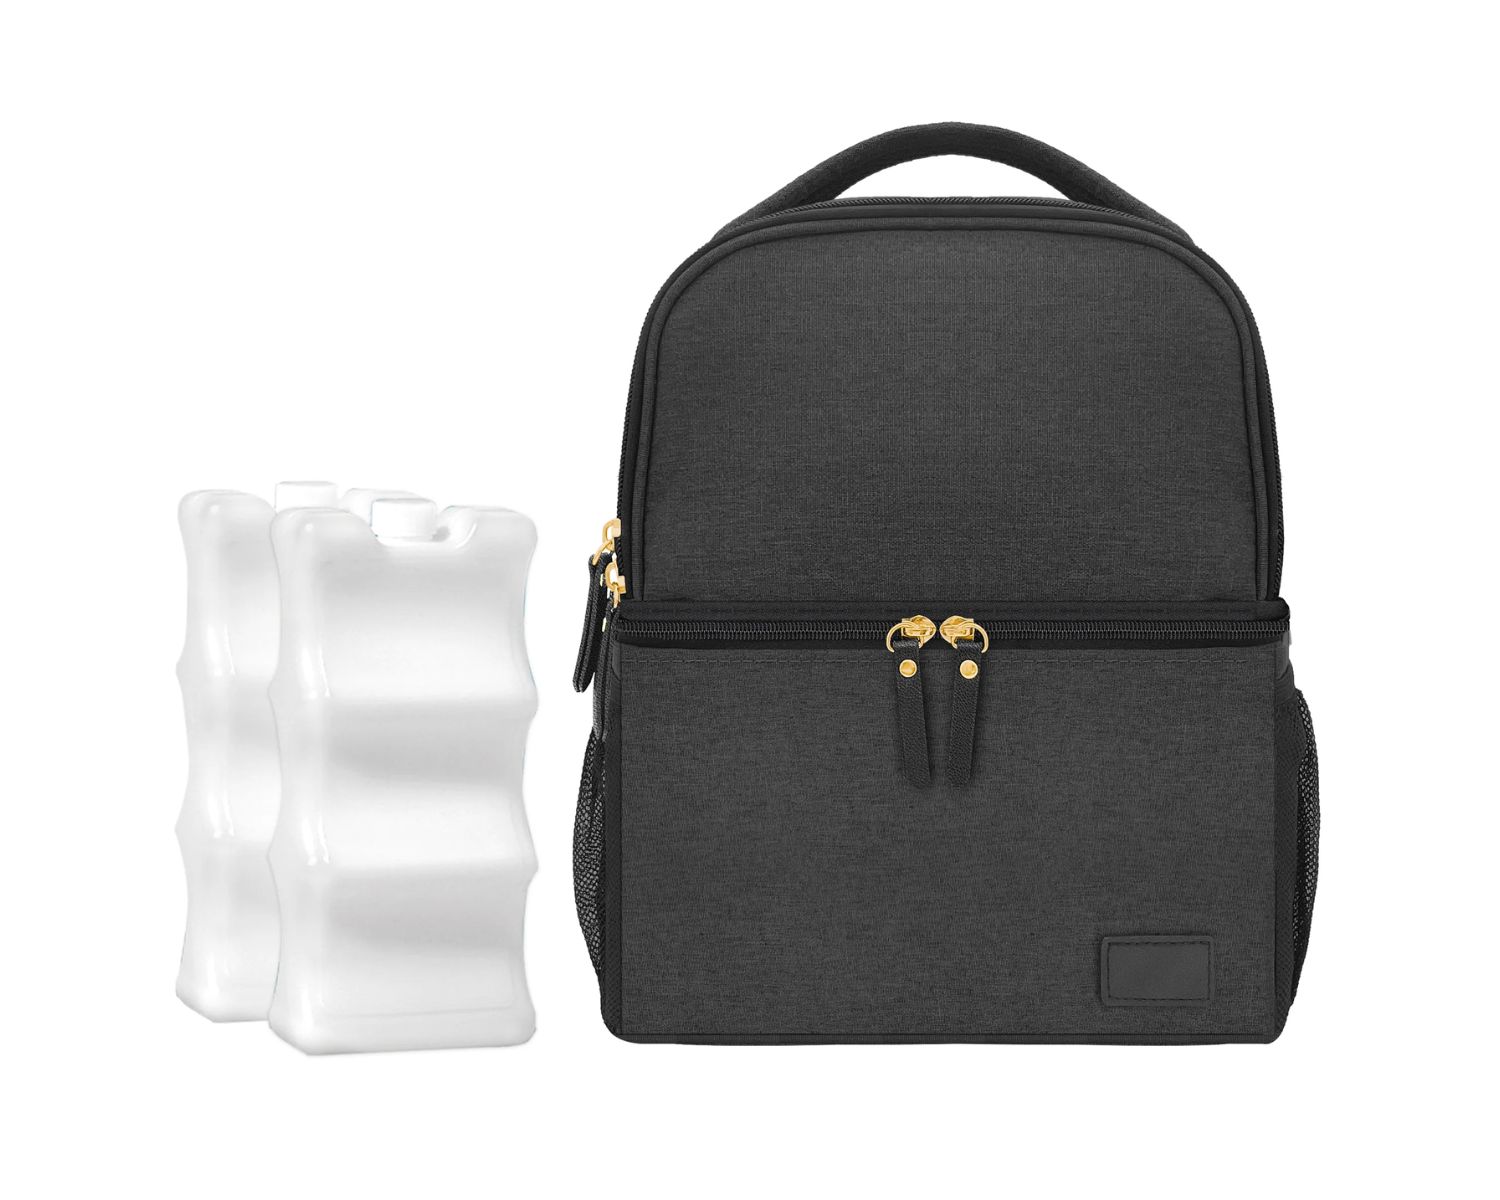 Breast Pump Bag Review: Stylish and Functional Options